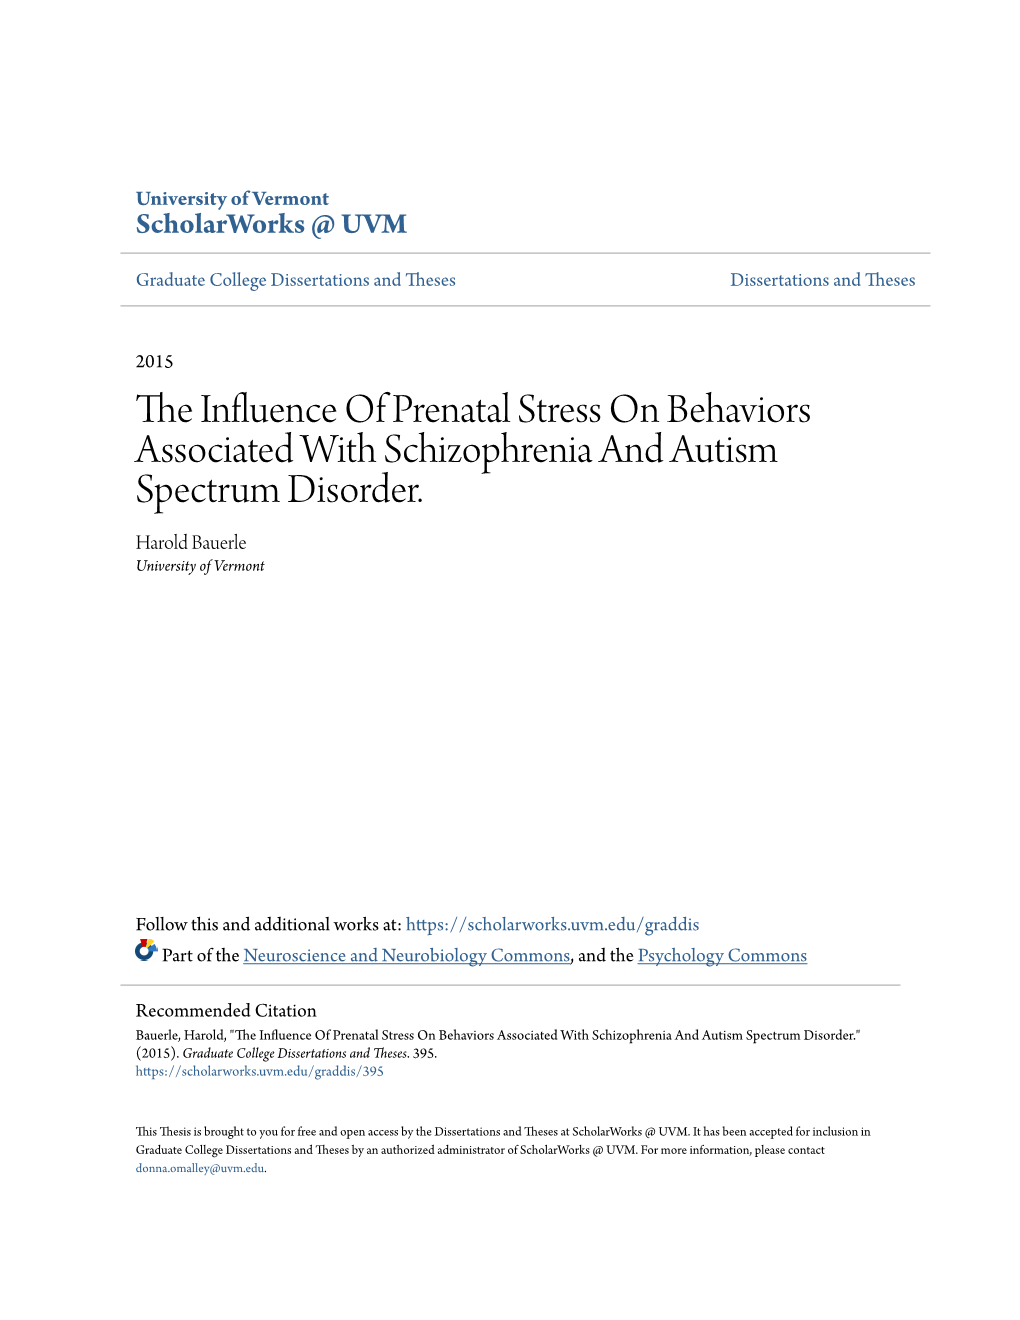 The Influence of Prenatal Stress on Behaviors Associated with Schizophrenia and Autism Spectrum Disorder